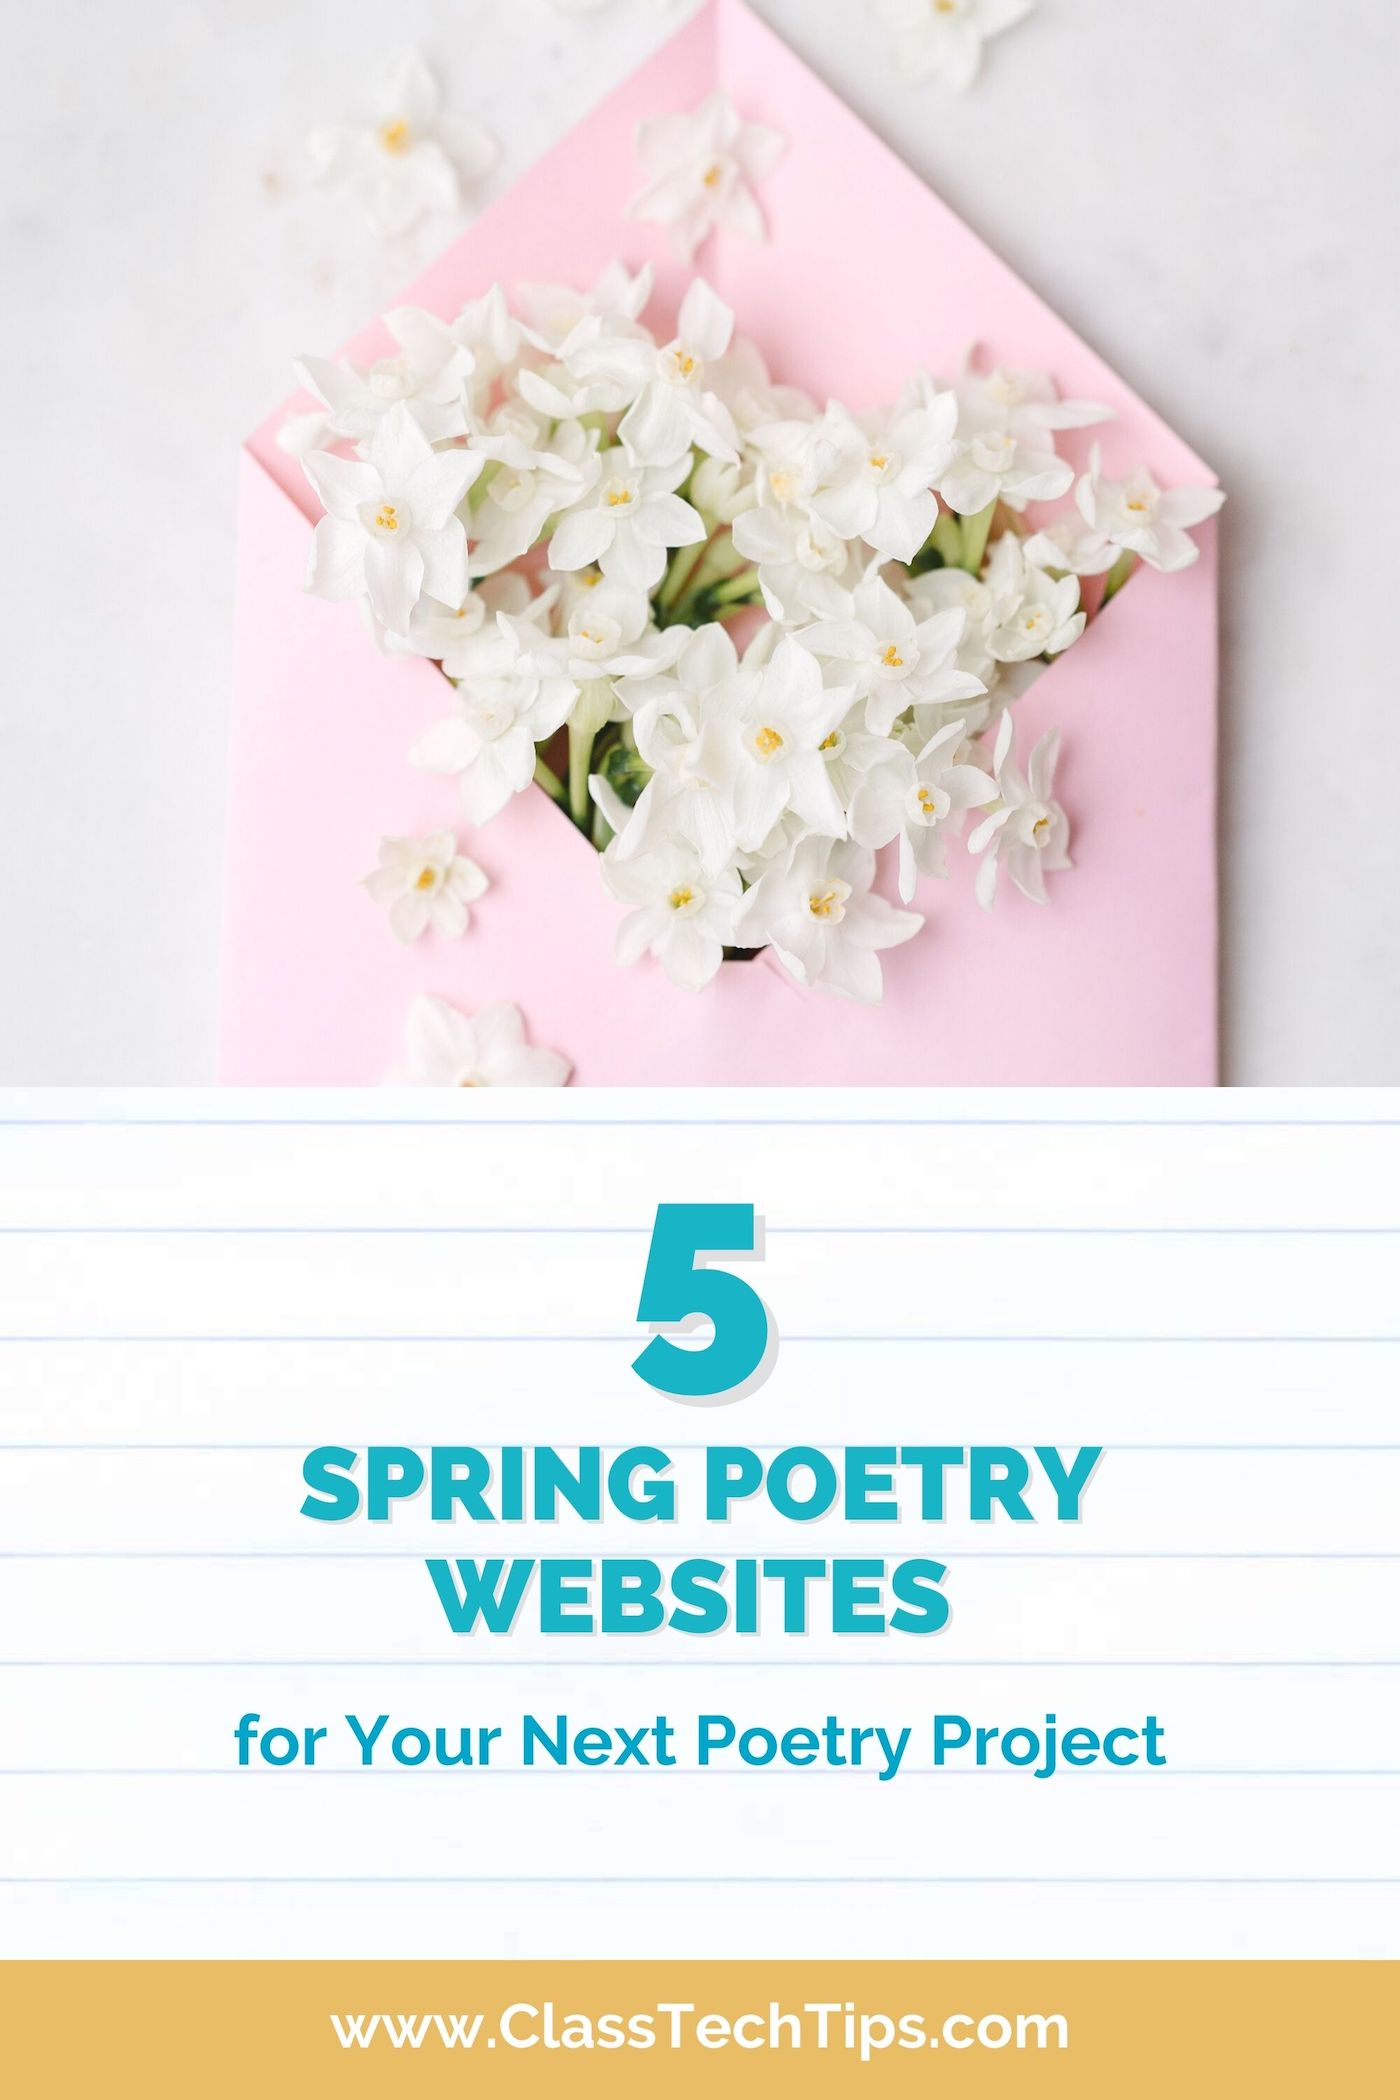 Poetry isn’t just for spring, but with April as poetry month, you might find it’s the perfect time to explore a spring writing poetry project.